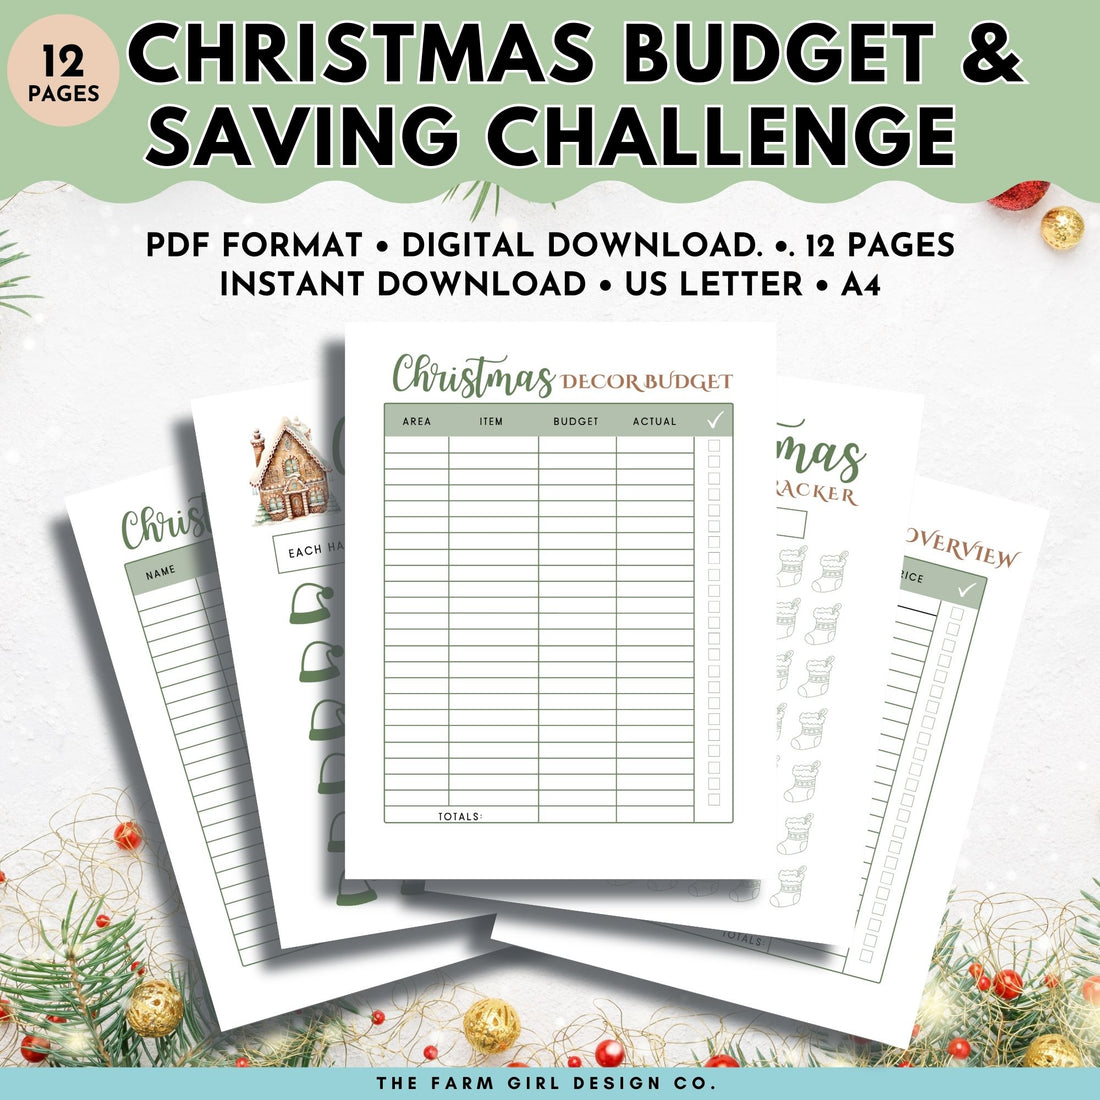 Are you ready to make this holiday season the most organized and budget-friendly one yet? Our Christmas Binder, designed to help you plan, save, and budget for Christmas! With 6 Christmas Saving Challenges and 5 comprehensive Christmas Budget Templates, this bundle is your ultimate holiday financial planning companion.